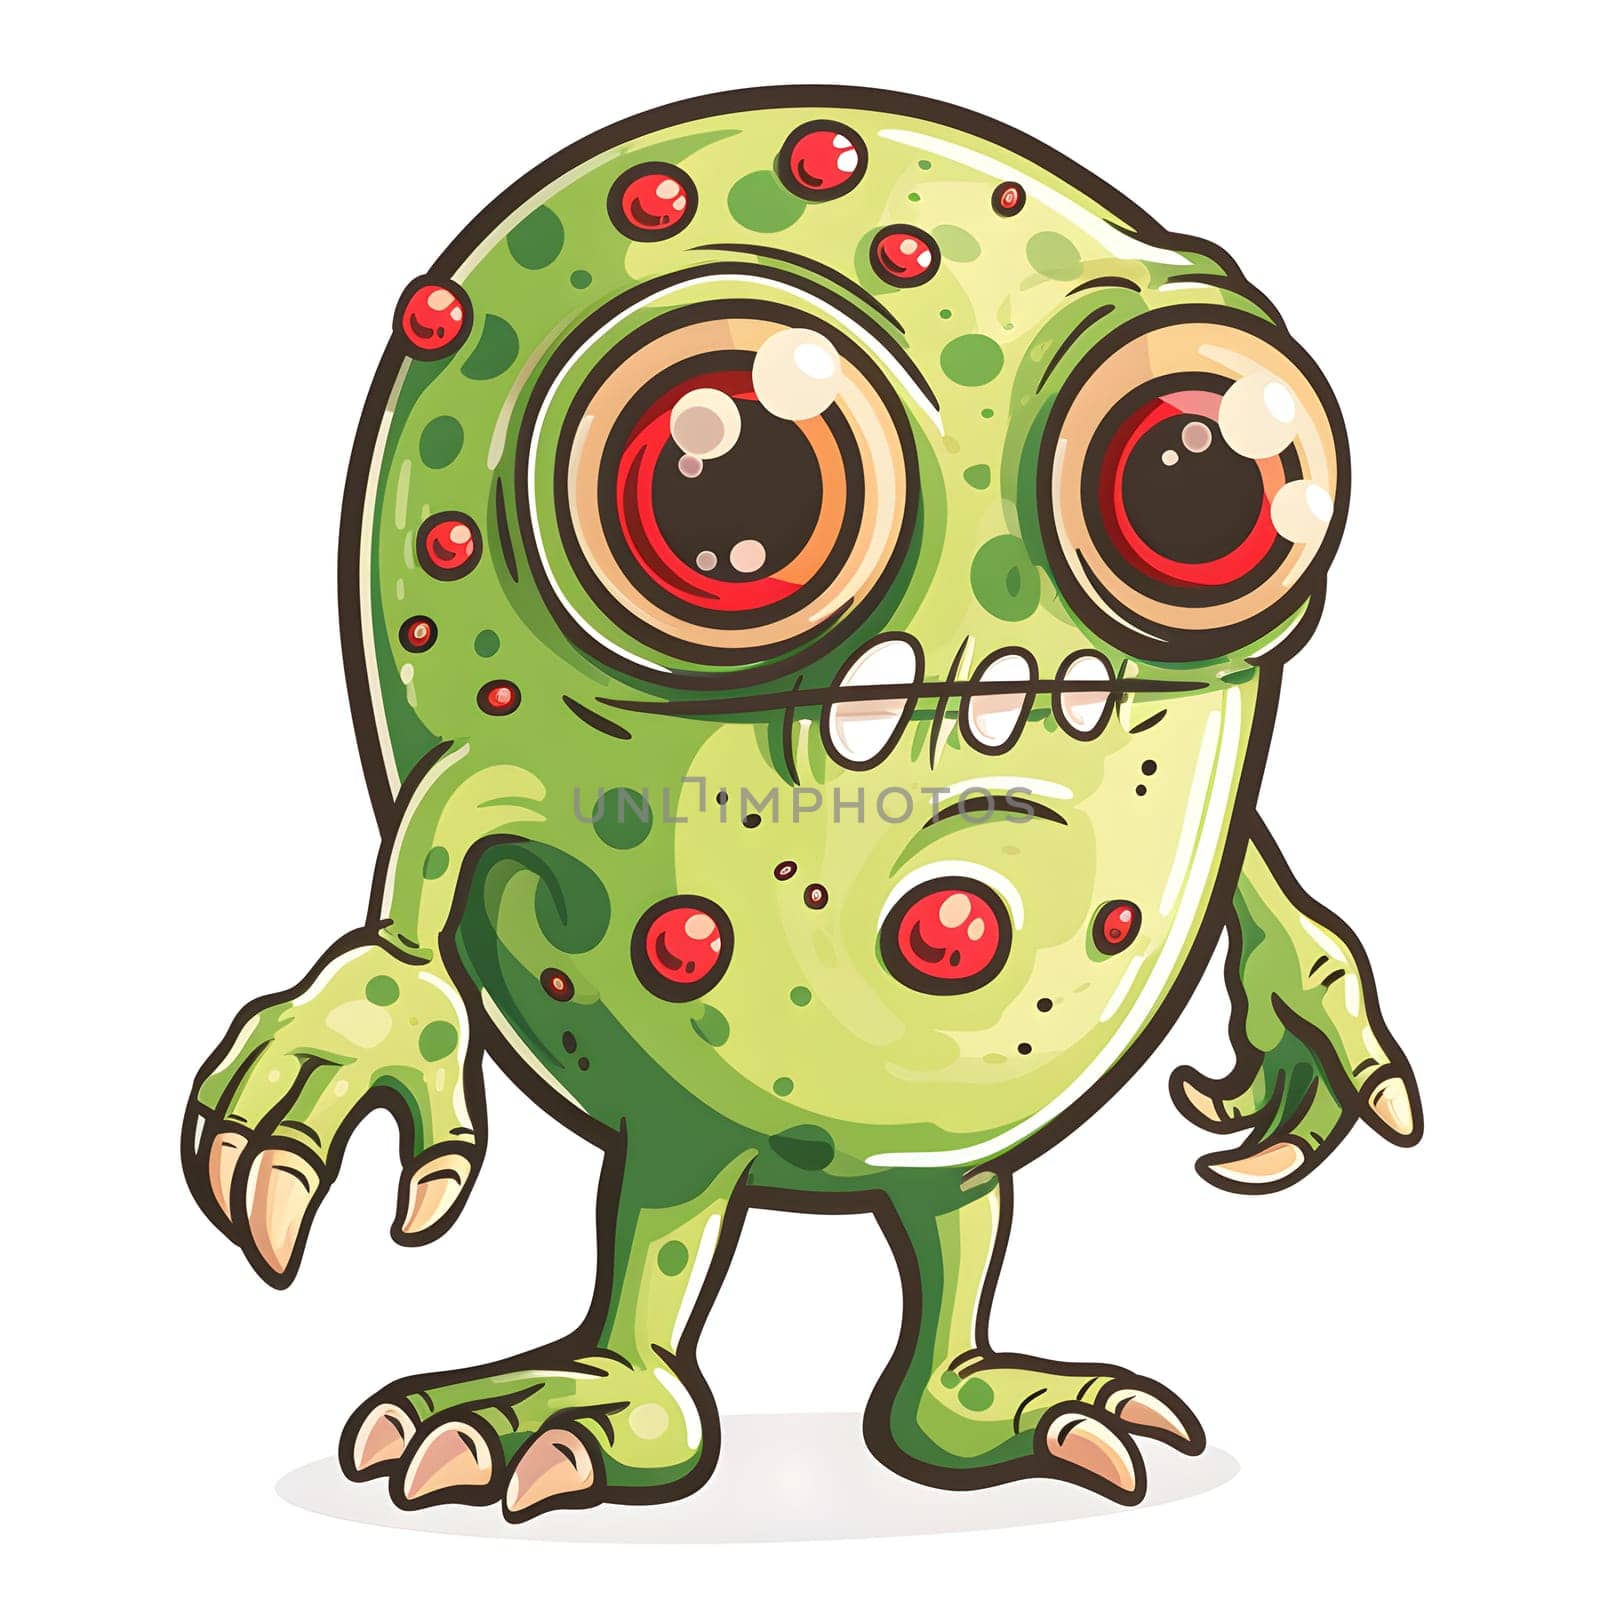 A fictional character inspired by a true frog, this green cartoon monster with big eyes and claws stands on a white background. The illustration combines elements of art and amphibian organisms